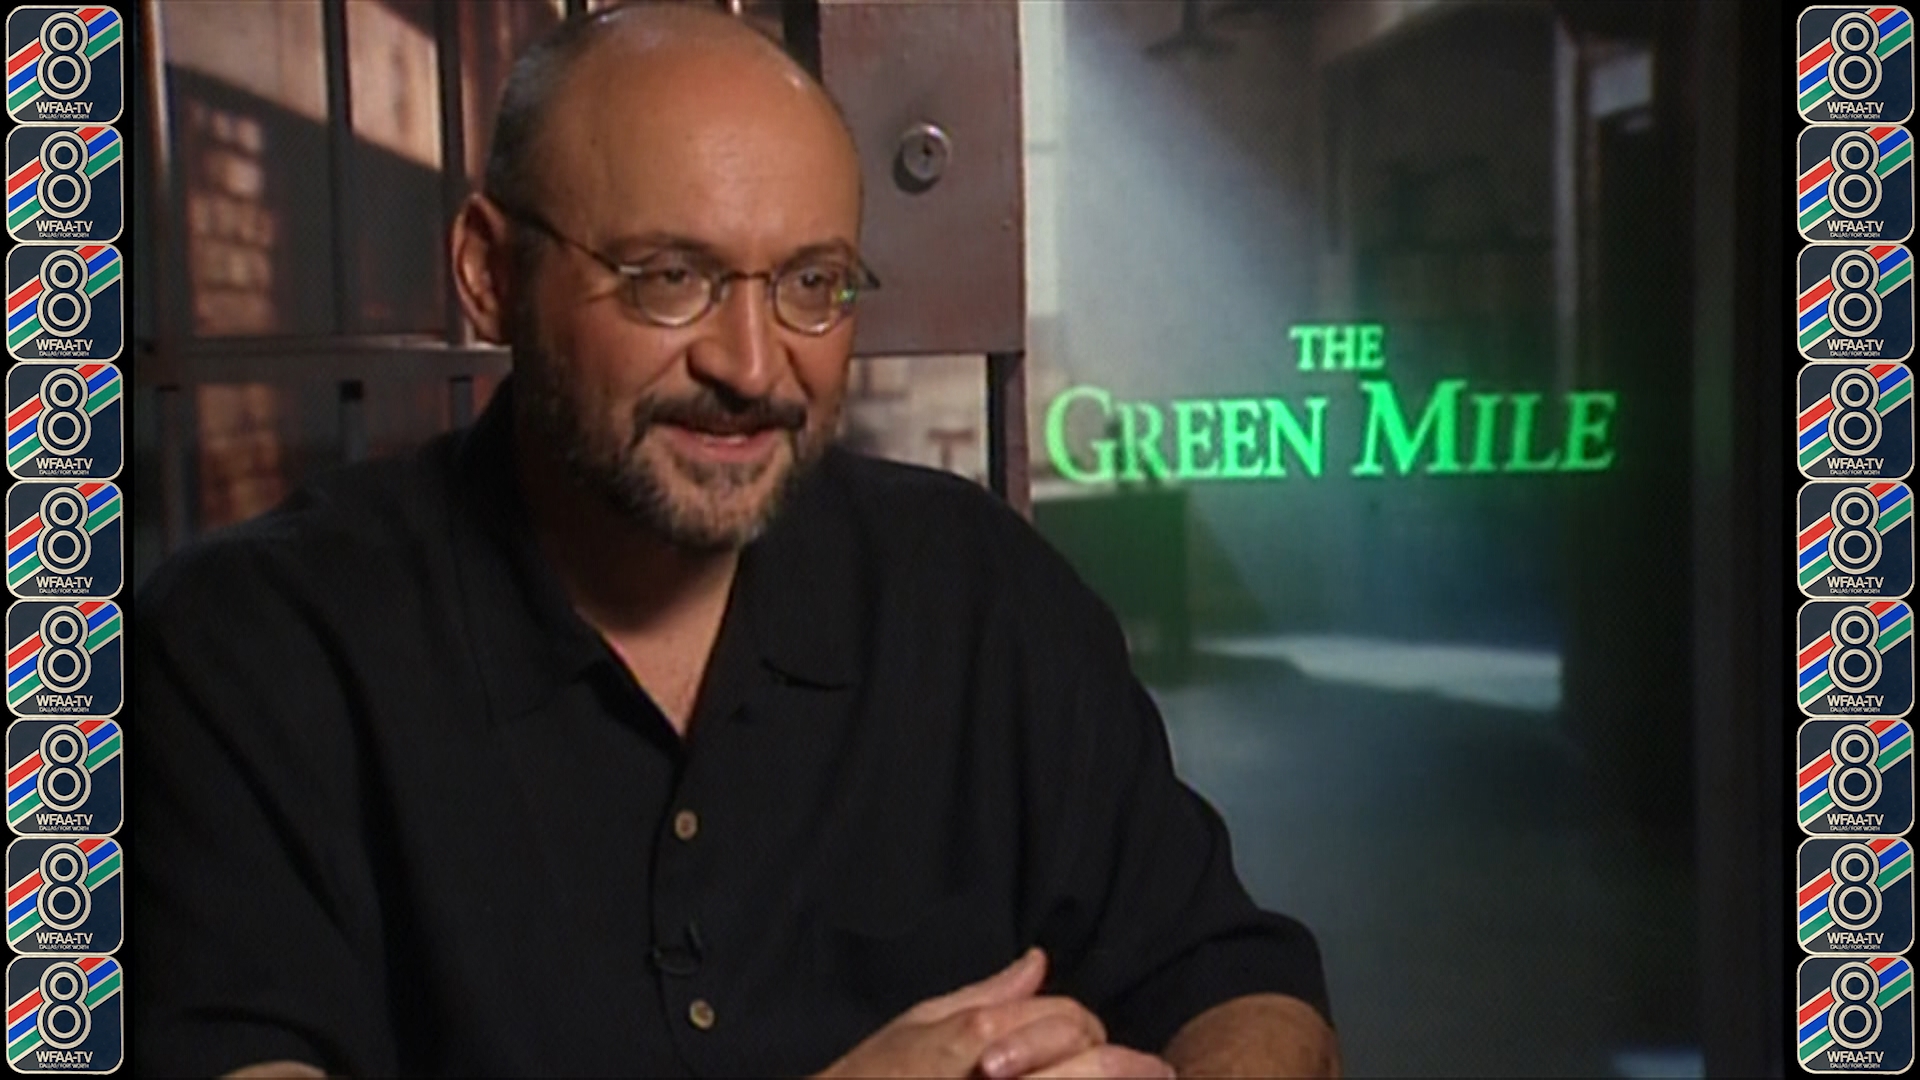 Director Frank Darabont sat down with WFAA to talk about making the 1999 film The Green Mile.